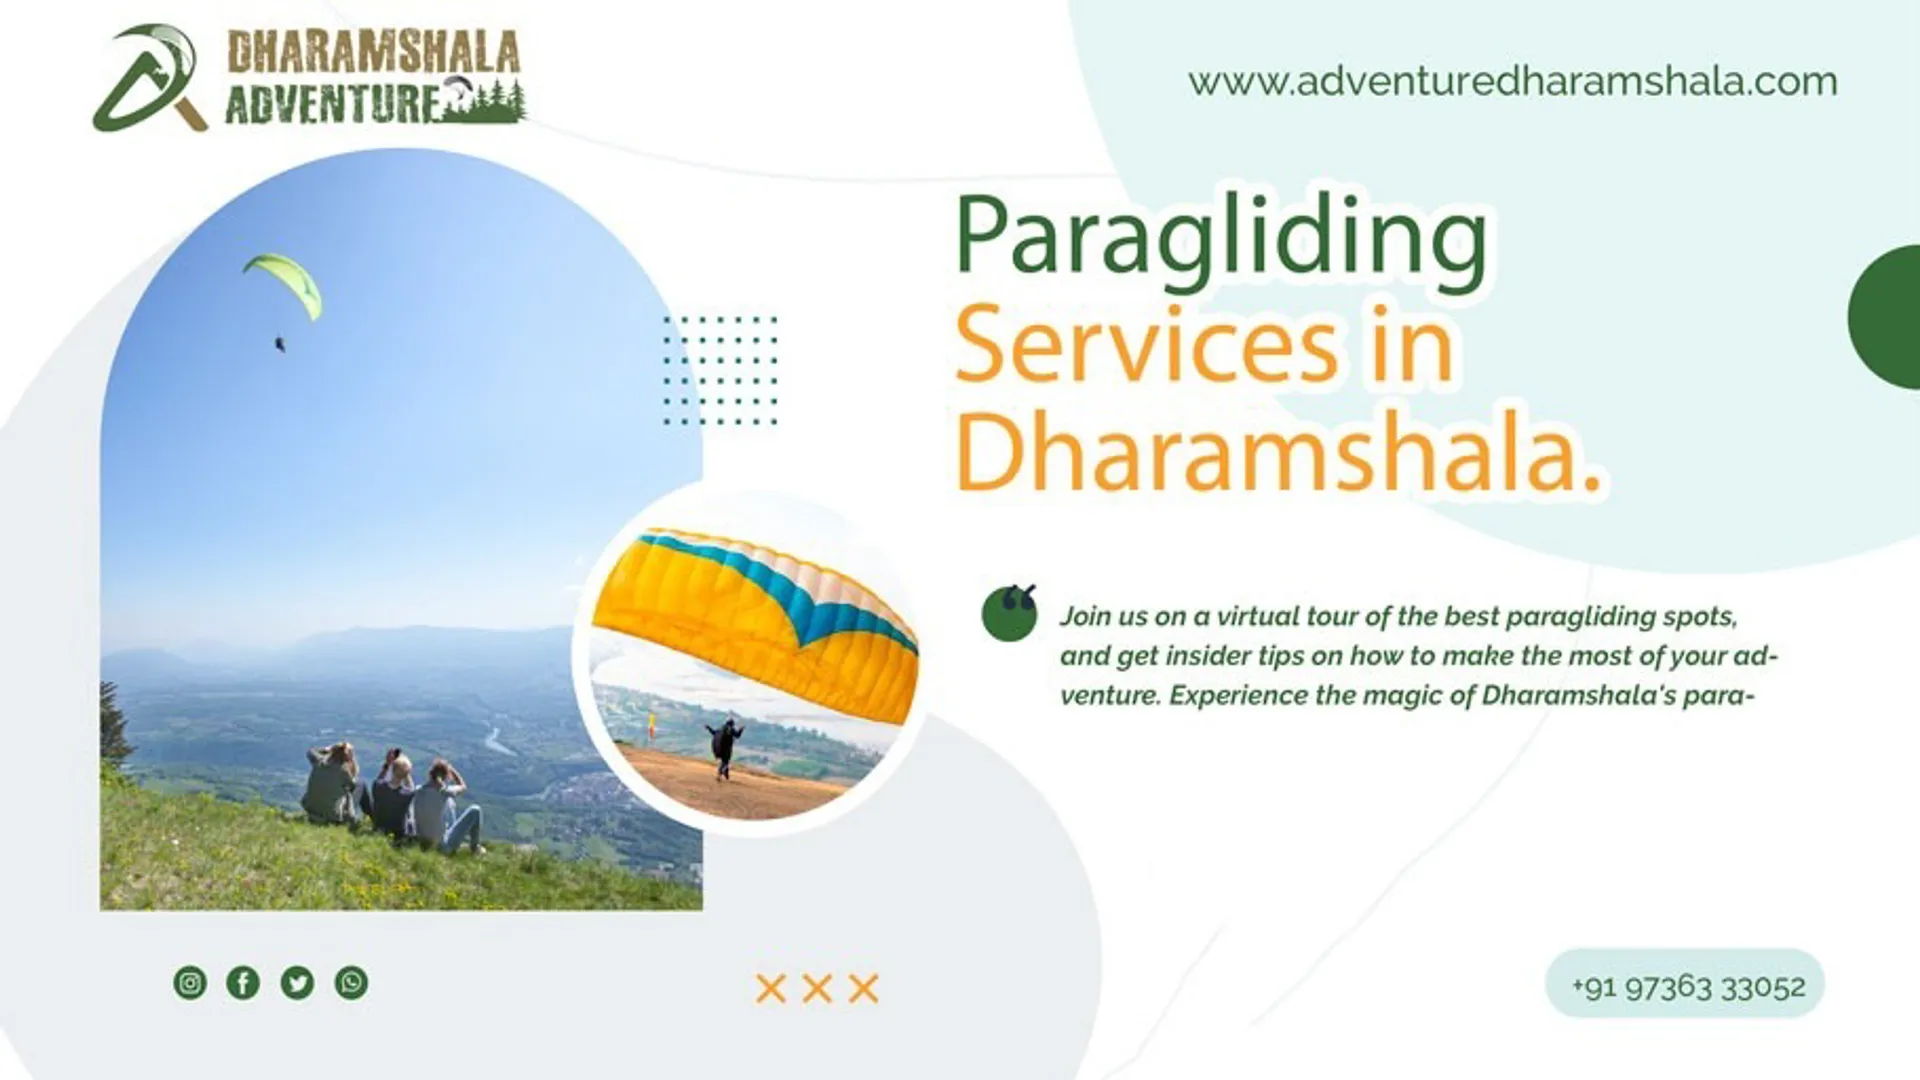 Experience the thrill of flying like a bird over the breathtaking landscapes of Dharamshala with Adventure Dharamshala's top-notch paragliding services. As the leading paragliding provider in the region, we offer a once-in-a-lifetime adventure that will leave you mesmerized.

Our team of experienced and certified pilots ensures a safe and unforgettable paragliding experience, giving you the opportunity to witness the stunning beauty of the Himalayan mountains and lush green valleys from a bird's-eye view.

Whether you're an adrenaline junkie seeking an adrenaline rush or a nature lover yearning for a unique perspective, Adventure Dharamshala's best paragliding experience is tailor-made for all. Trust us to take you on an unforgettable soaring adventure through the skies of Dharamshala. Book your paragliding flight now and let the adventure begin! https://bit.ly/3PYPEkv